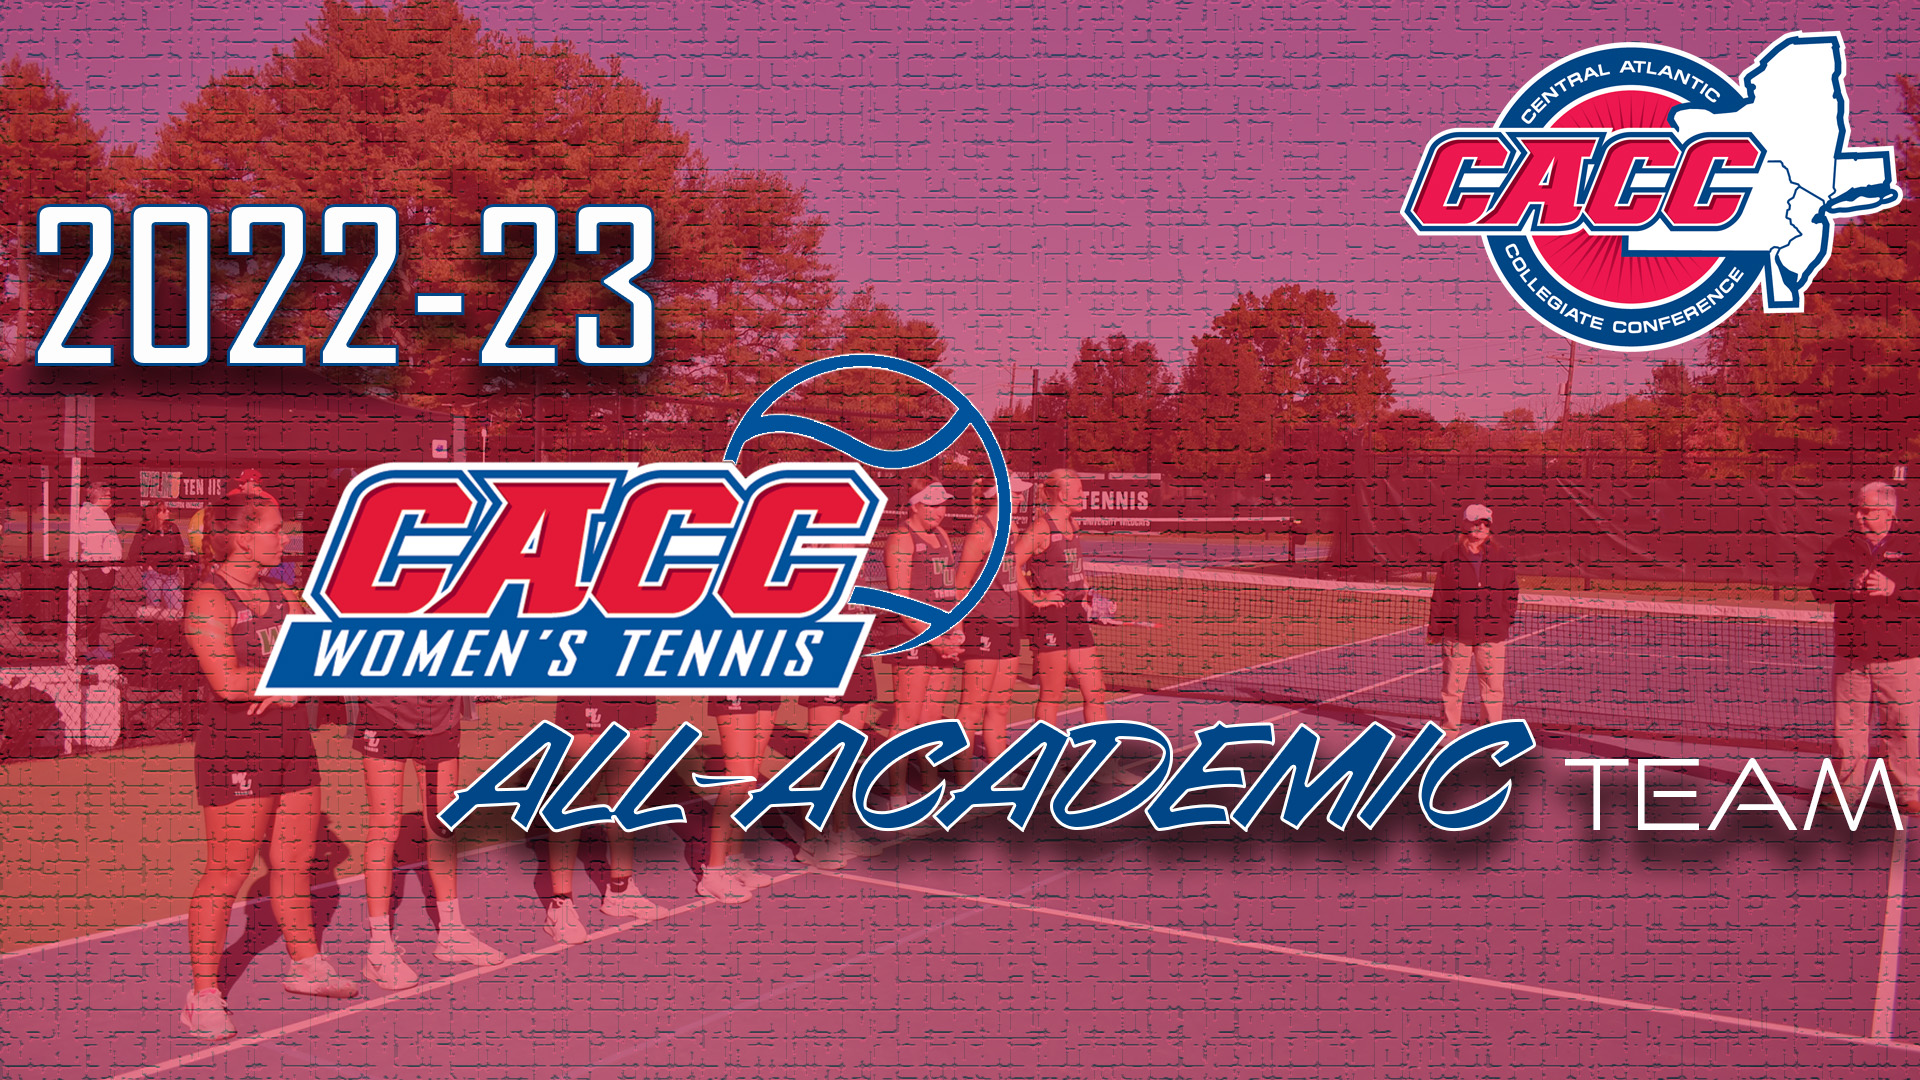 21 S-As Named to 2022-23 CACC WTEN All-Academic Team